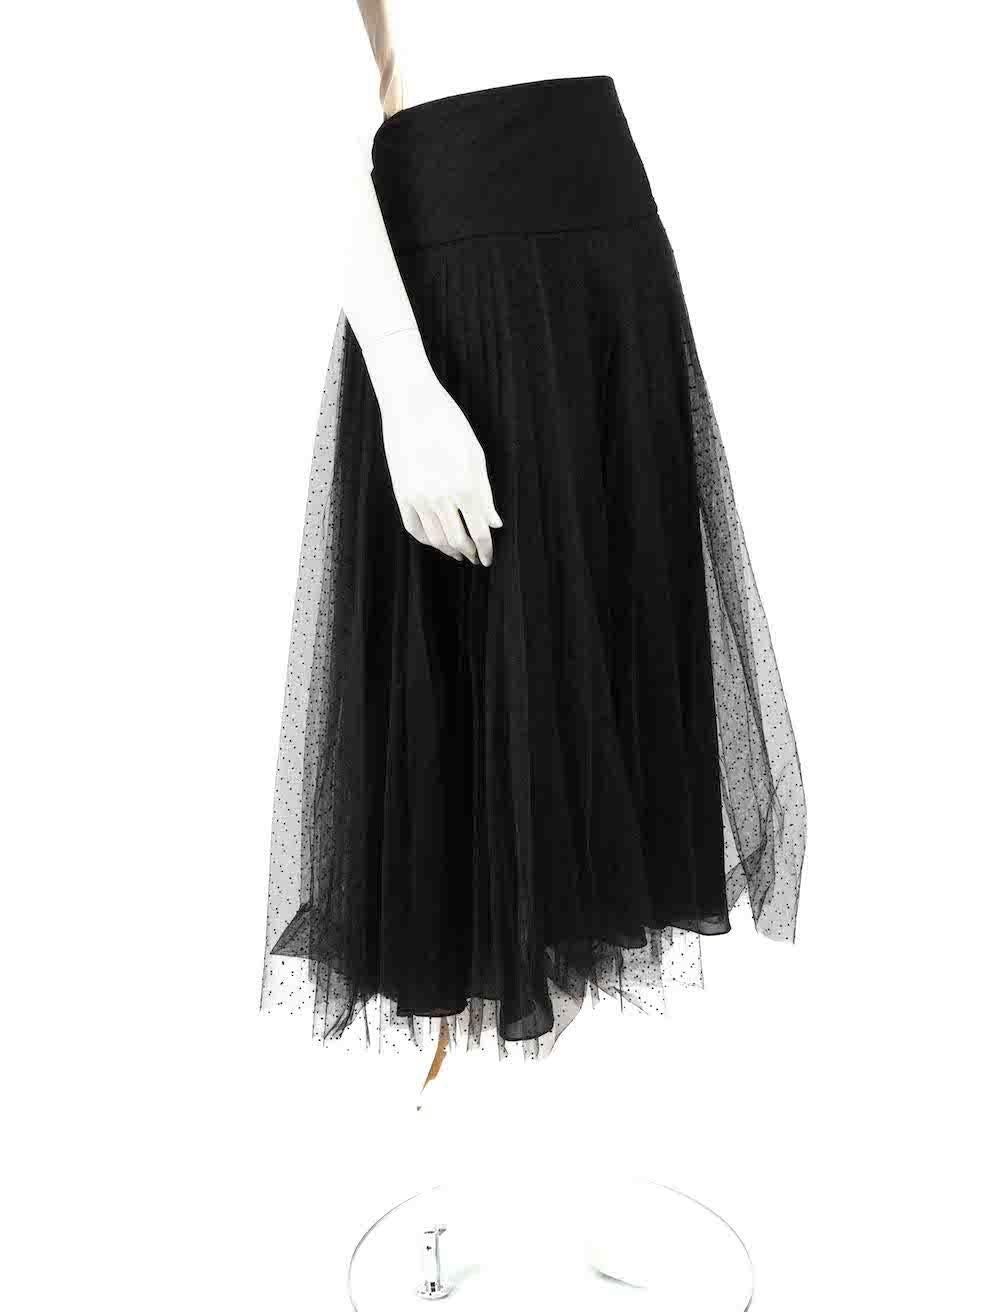 CONDITION is Very good. Hardly any visible wear to skirt is evident on this used Dior designer resale item.
 
 
 
 Details
 
 
 Black
 
 Synthetic
 
 Midi skirt
 
 Pleated
 
 Mesh tulle
 
 Slightly see through
 
 Side zip closure with hook and eye
